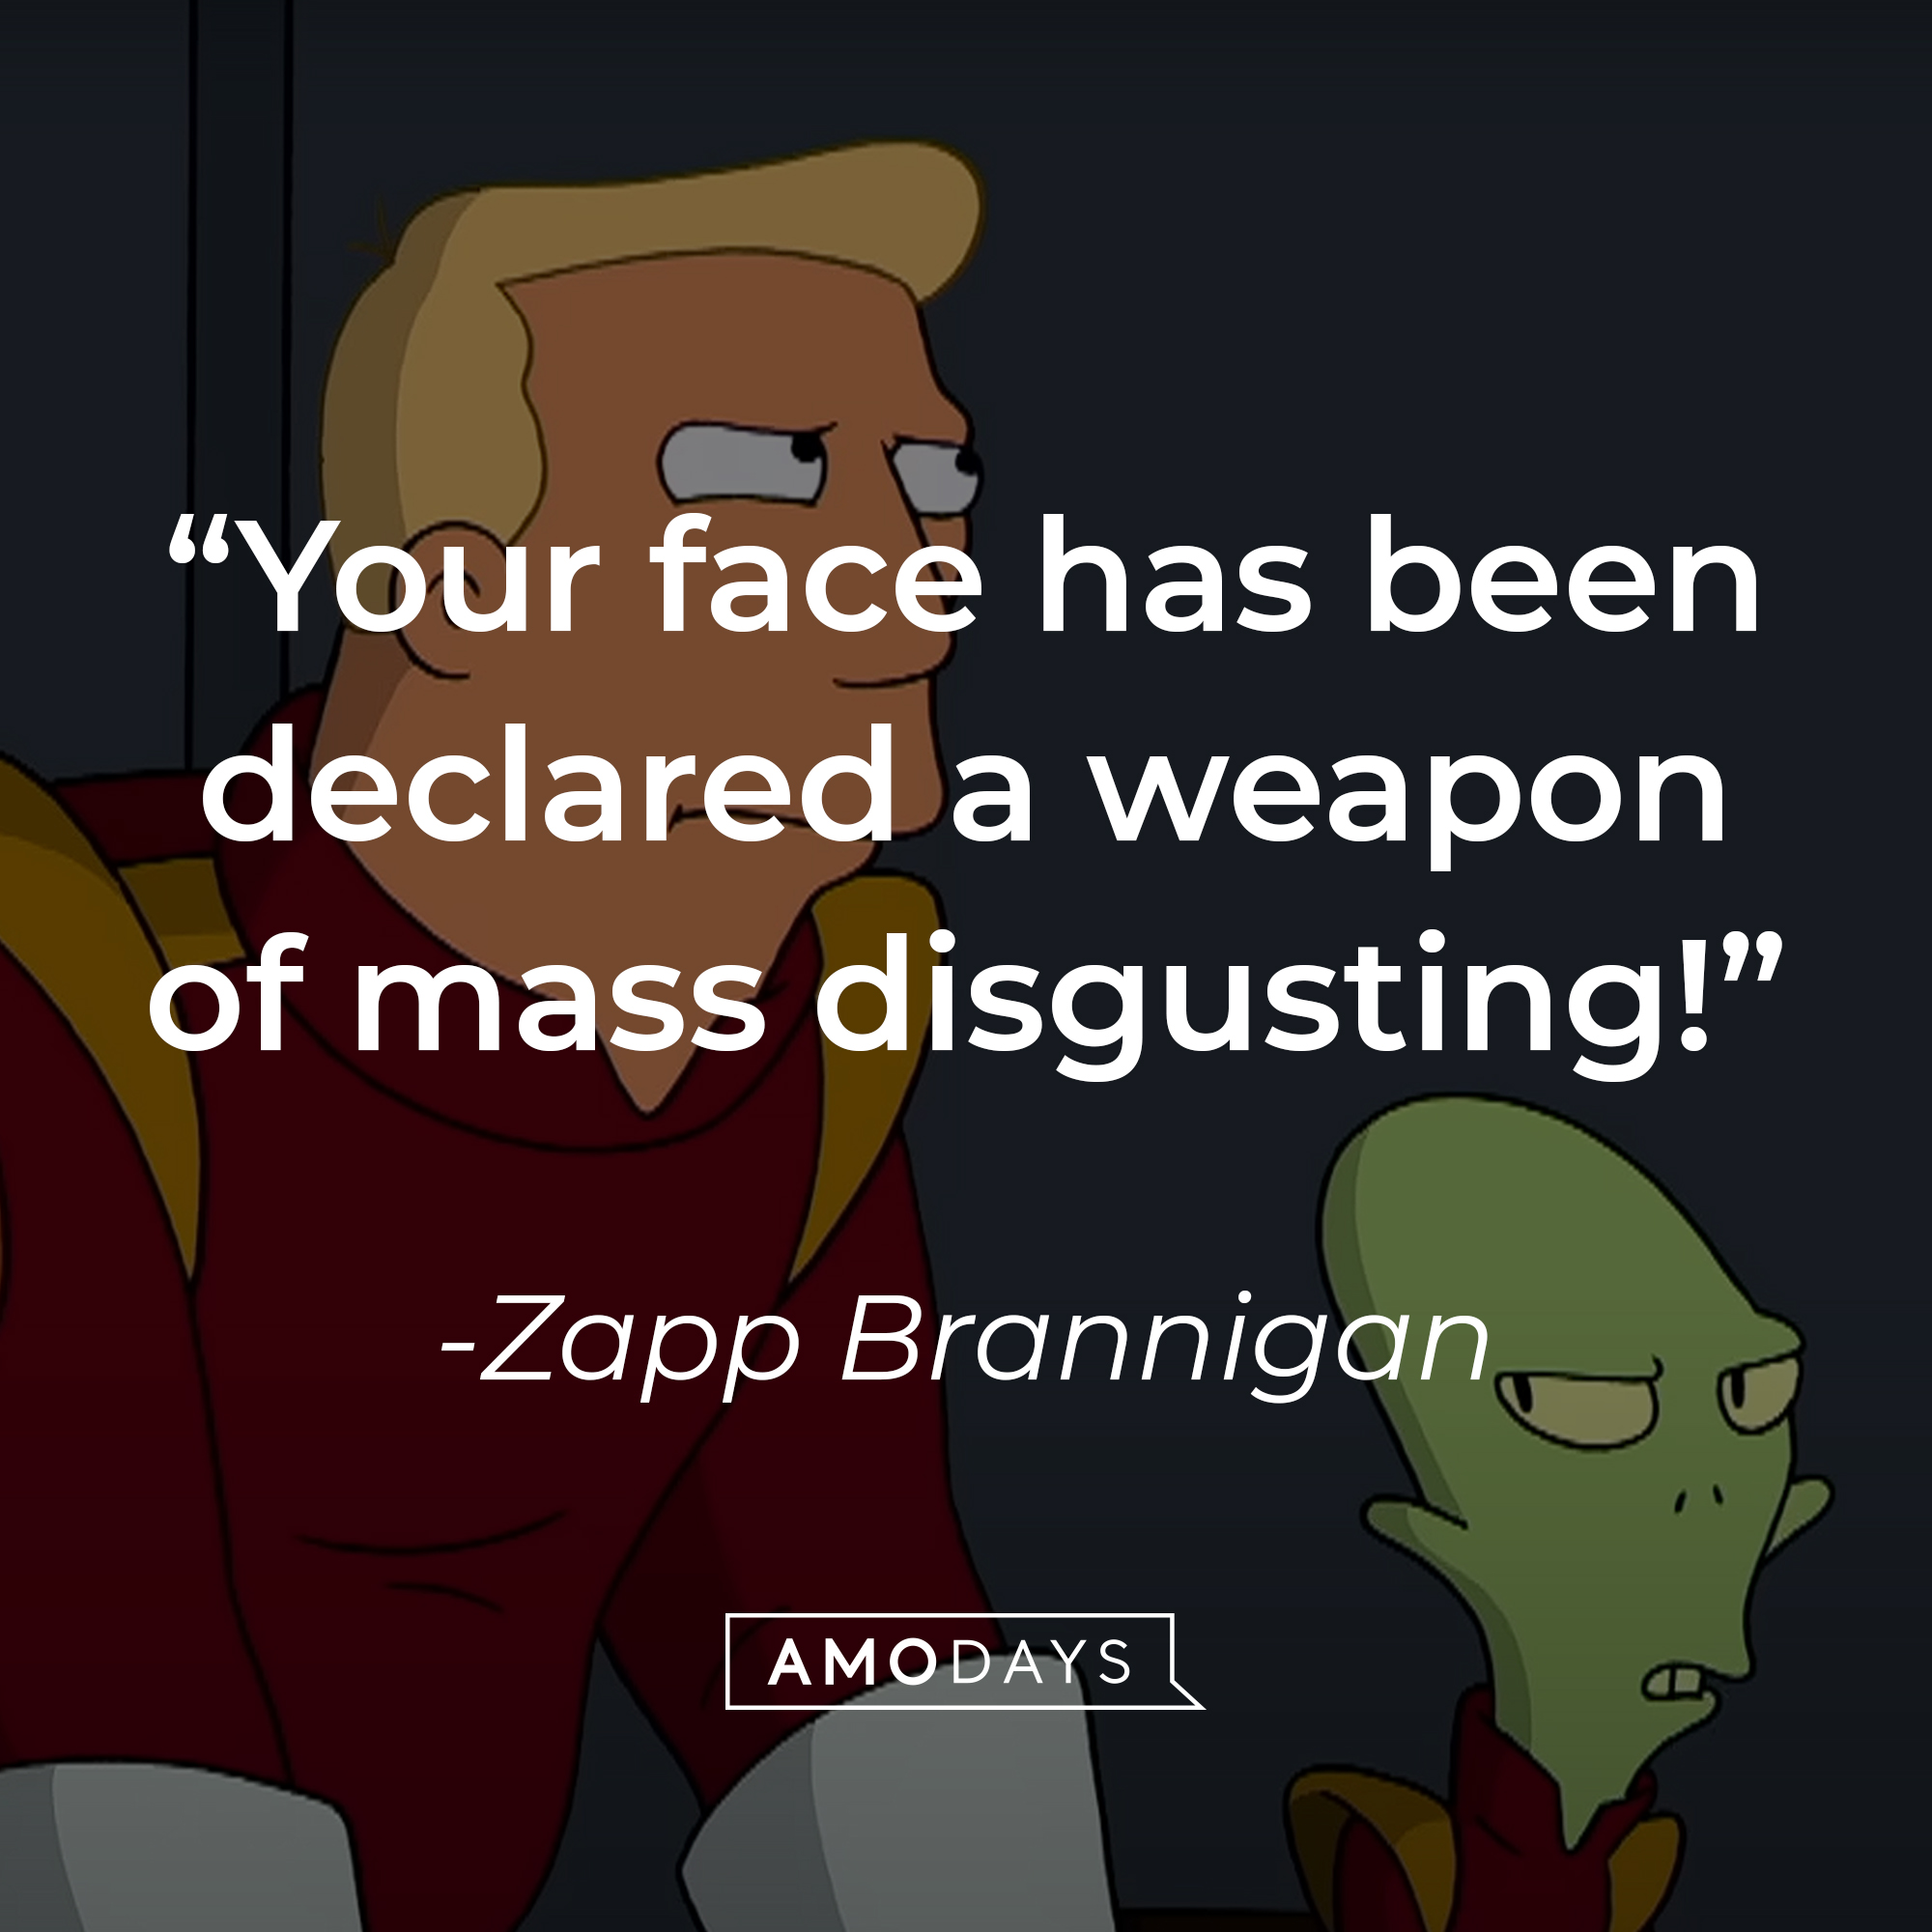 Zapp Brannigan's quote: "Your face has been declared a weapon of mass disgusting!" | Source: YouTube/adultswim